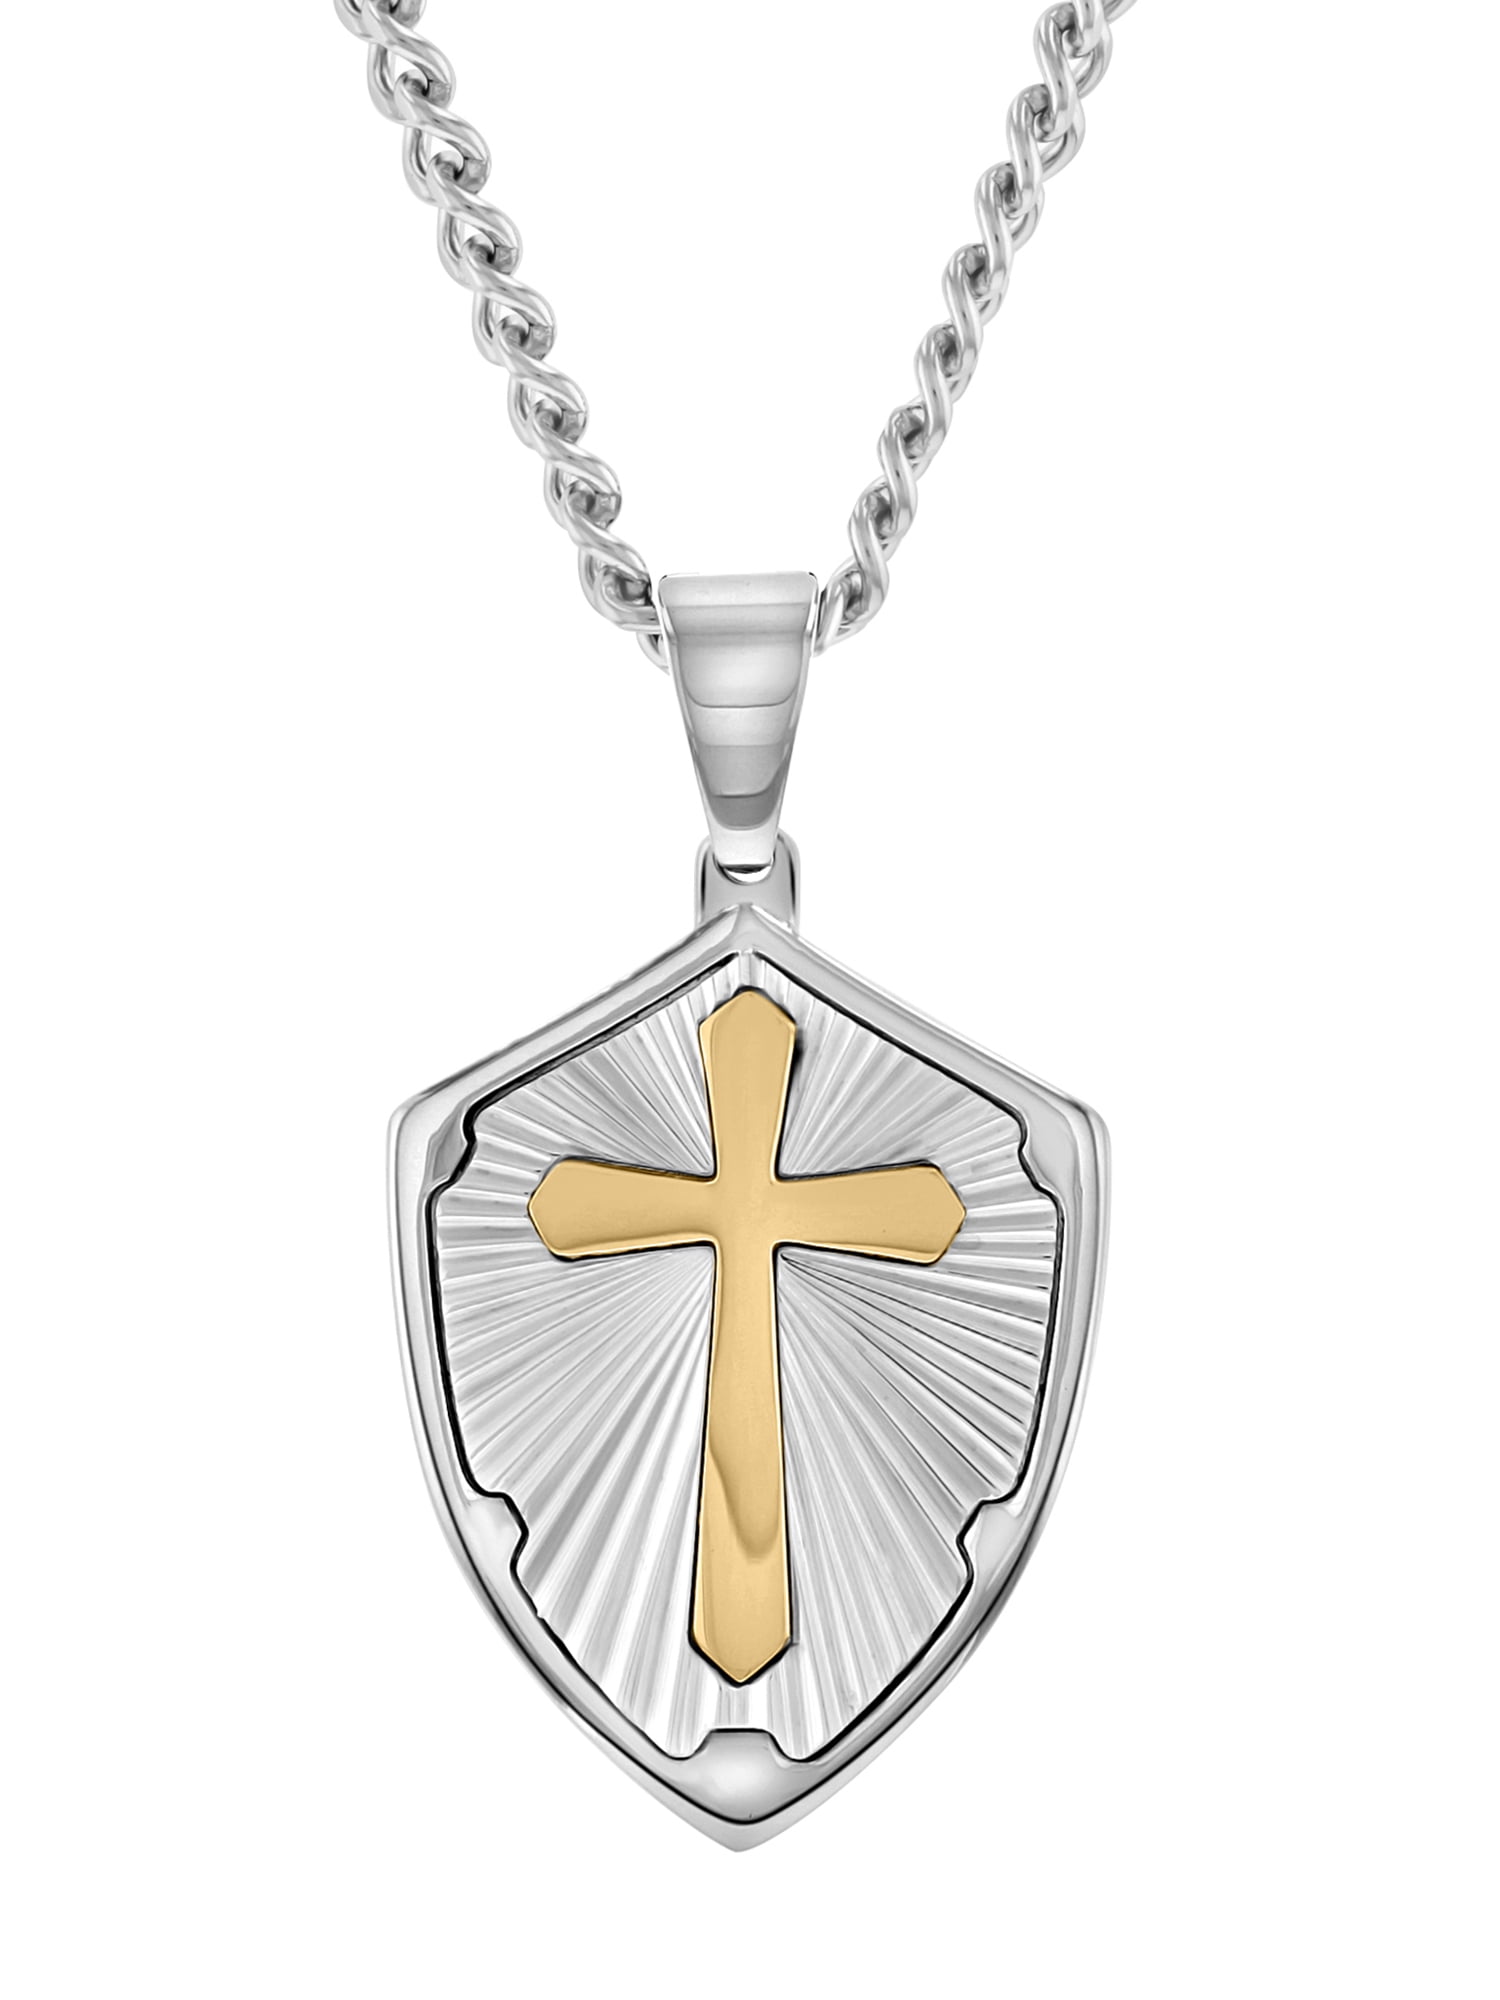 Details about   Men's 2 inch Long Large Customized Shield Pendant 14k White Gold Plated Silver